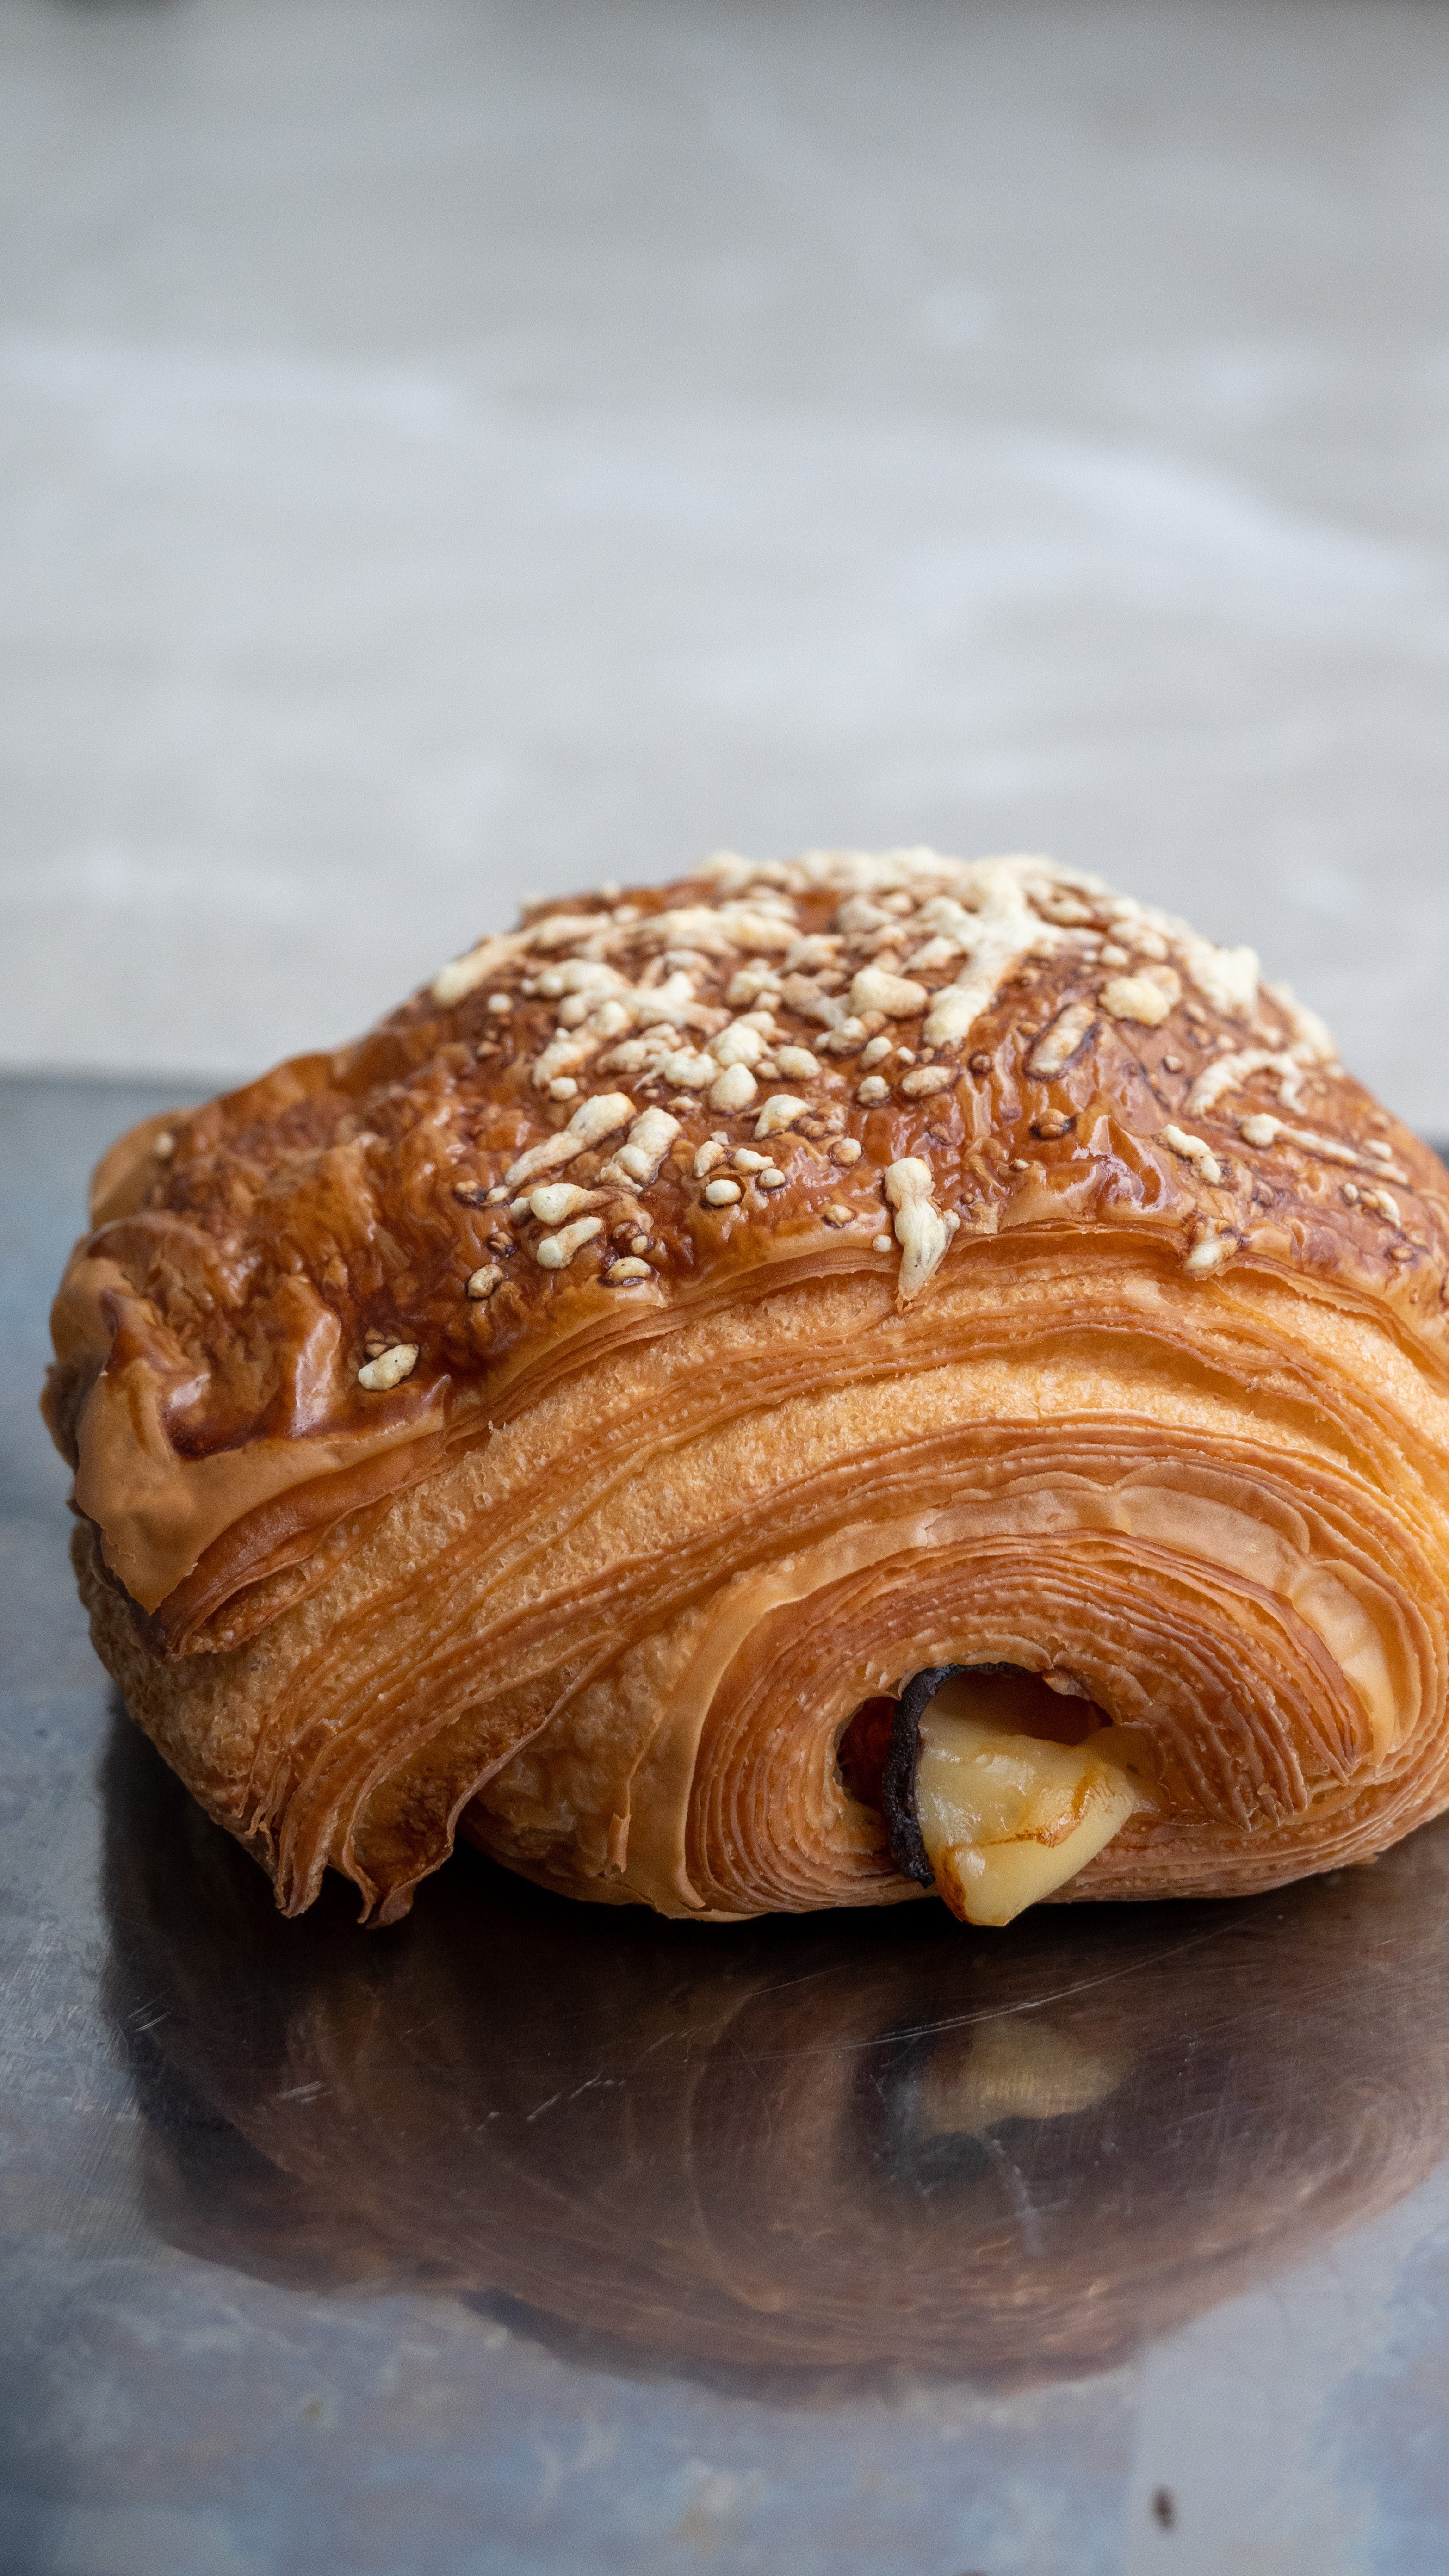 Ham and Cheese Croissant - Flaky golden croissant filled with savory ham and emmental cheese